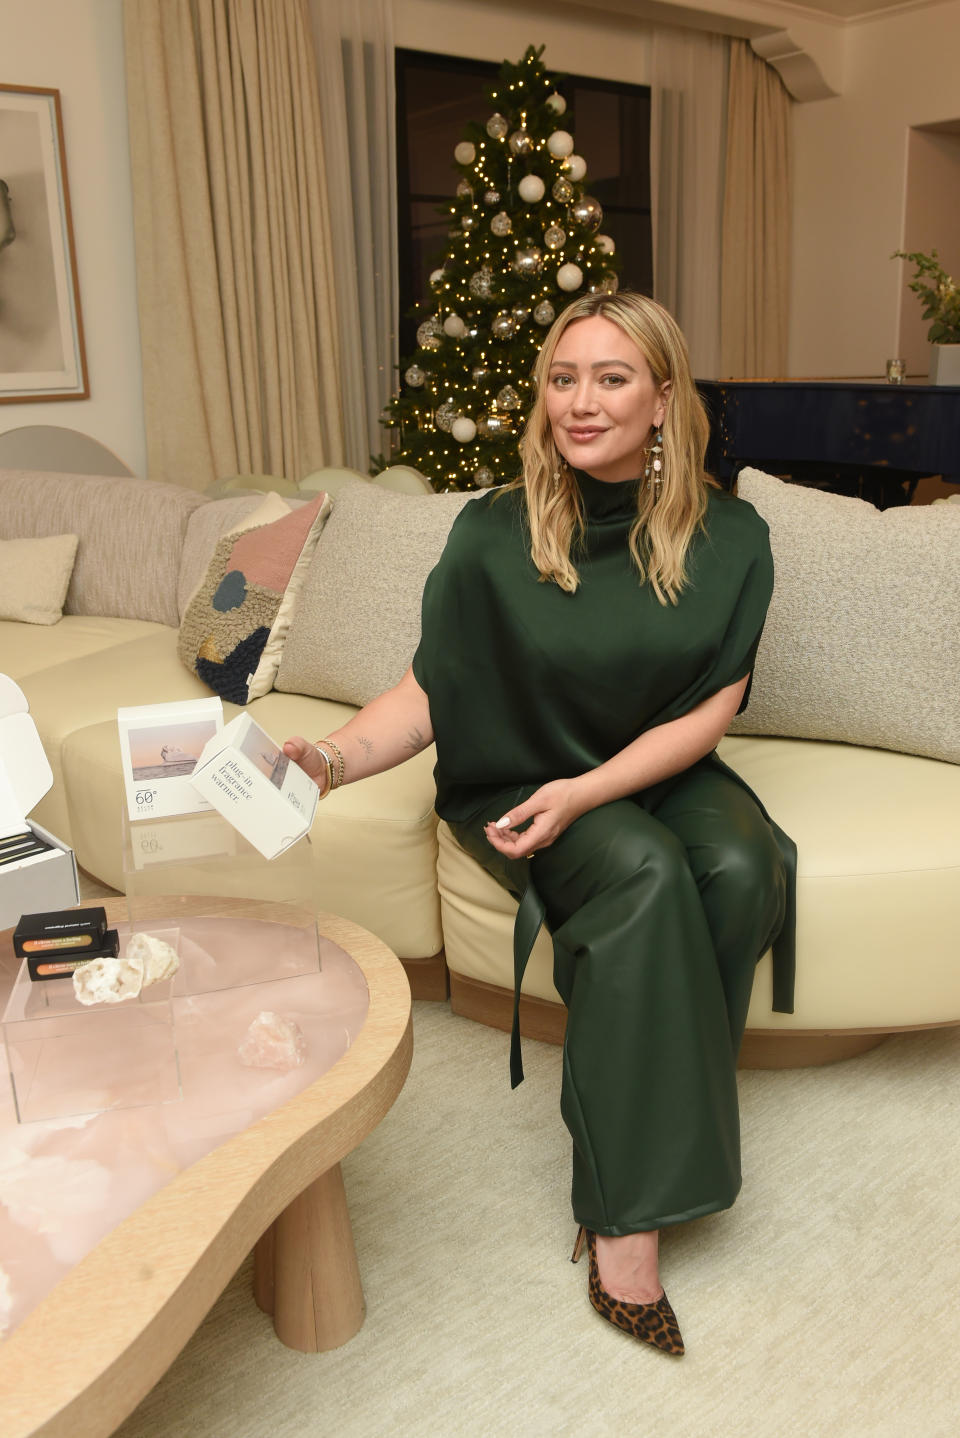 BEVERLY HILLS, CALIFORNIA - DECEMBER 05: Hilary Duff attends the Below 60° Festive Cocktail Reception at The Maybourne Beverly Hills on December 5, 2023 in Beverly Hills, California. Hosted by Chief Brand Director Hilary Duff, the party celebrated the launch of Below 60°, the next generation of air fragrance devices and can be found at www.below60.com (Photo by Vivien Killilea/Getty Images for Below 60°)